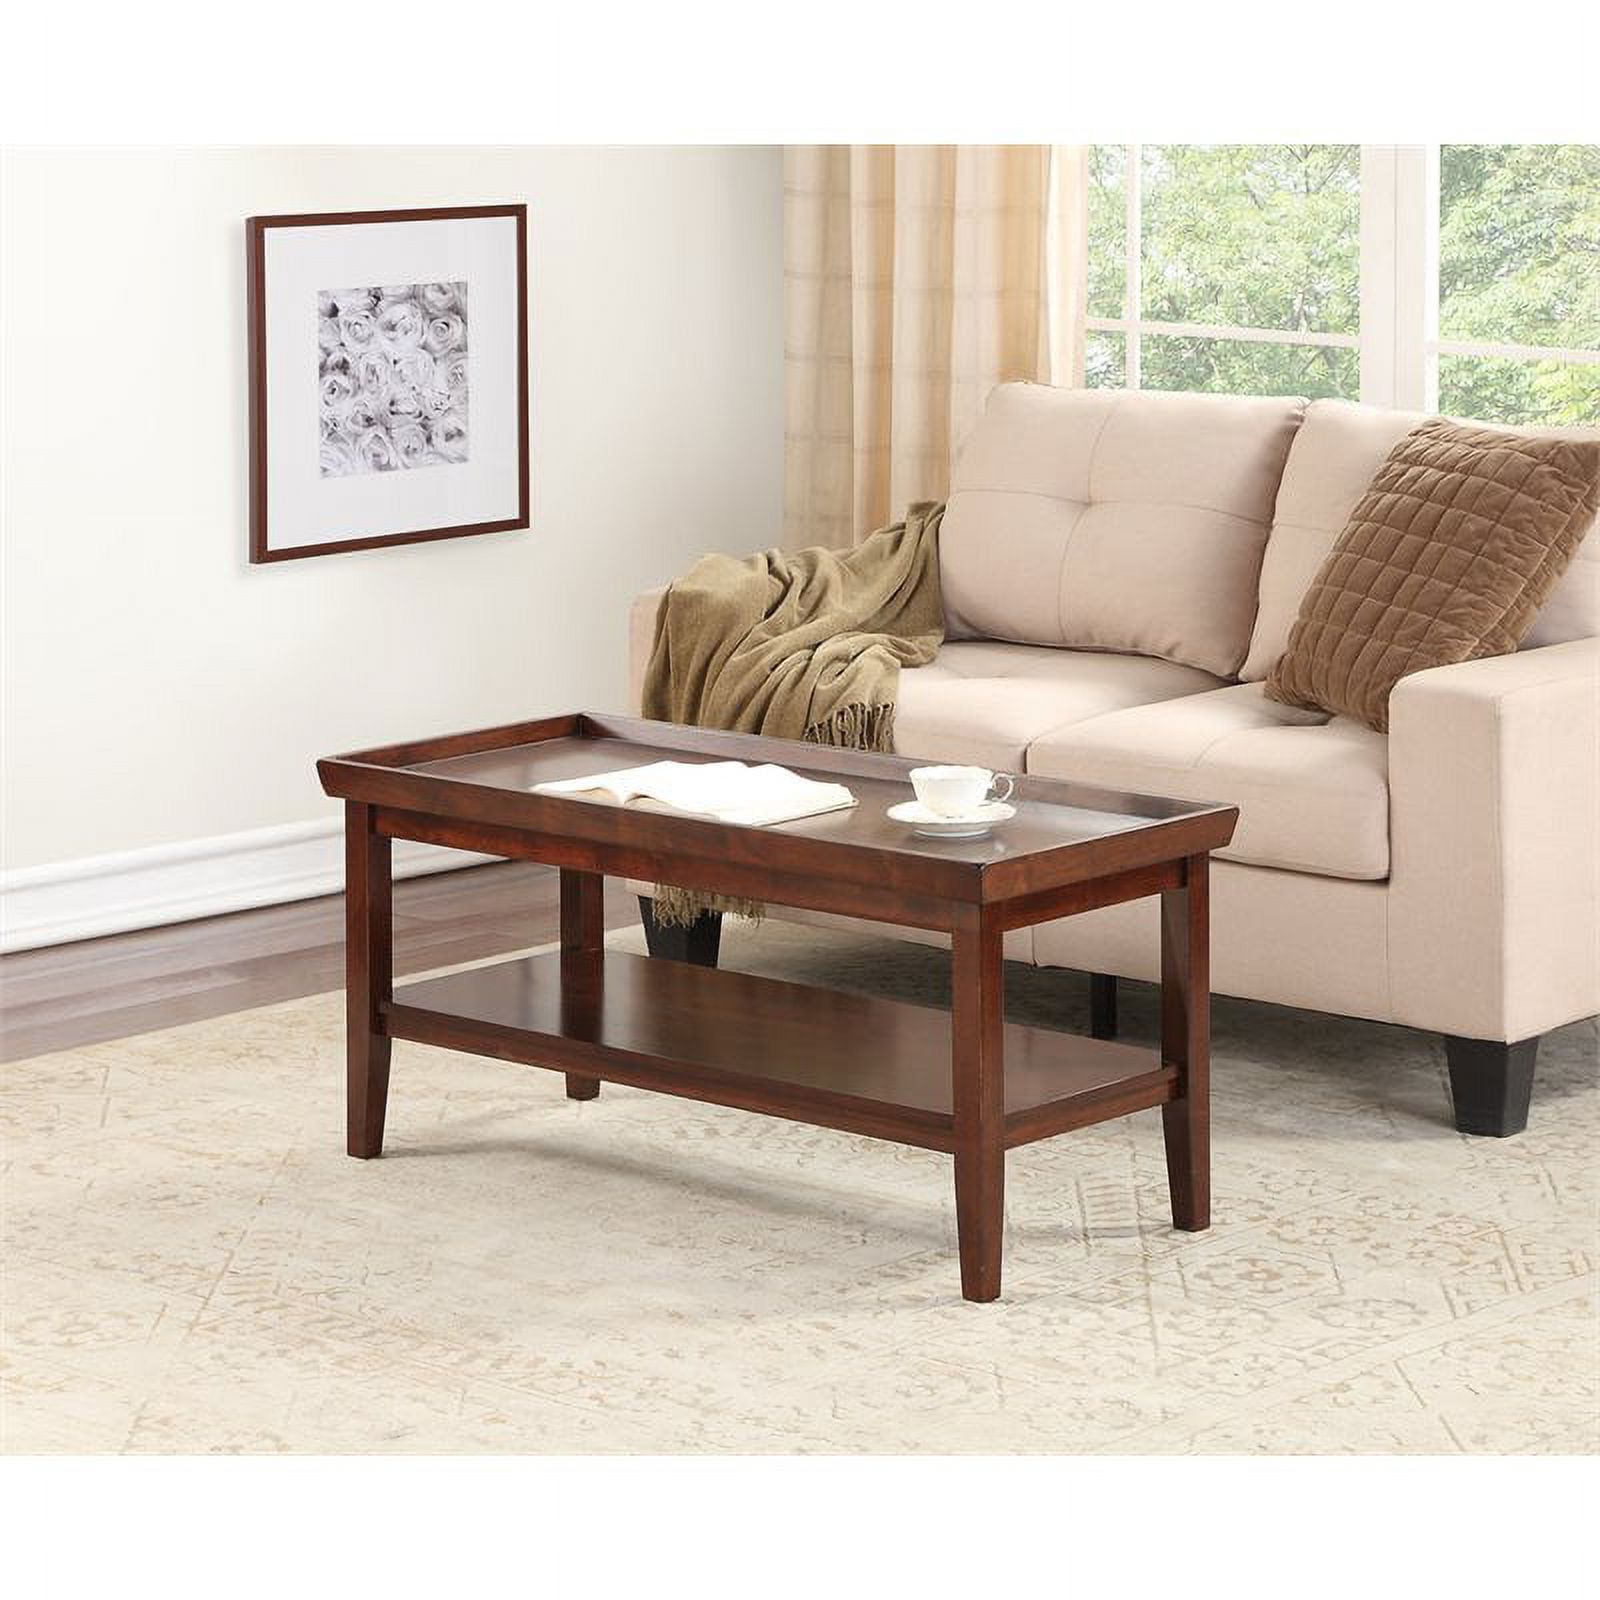 Pemberly Row Coffee Table In Espresso Wood Finish – Walmart Inside Trendy Espresso Wood Finish Coffee Tables (View 6 of 10)